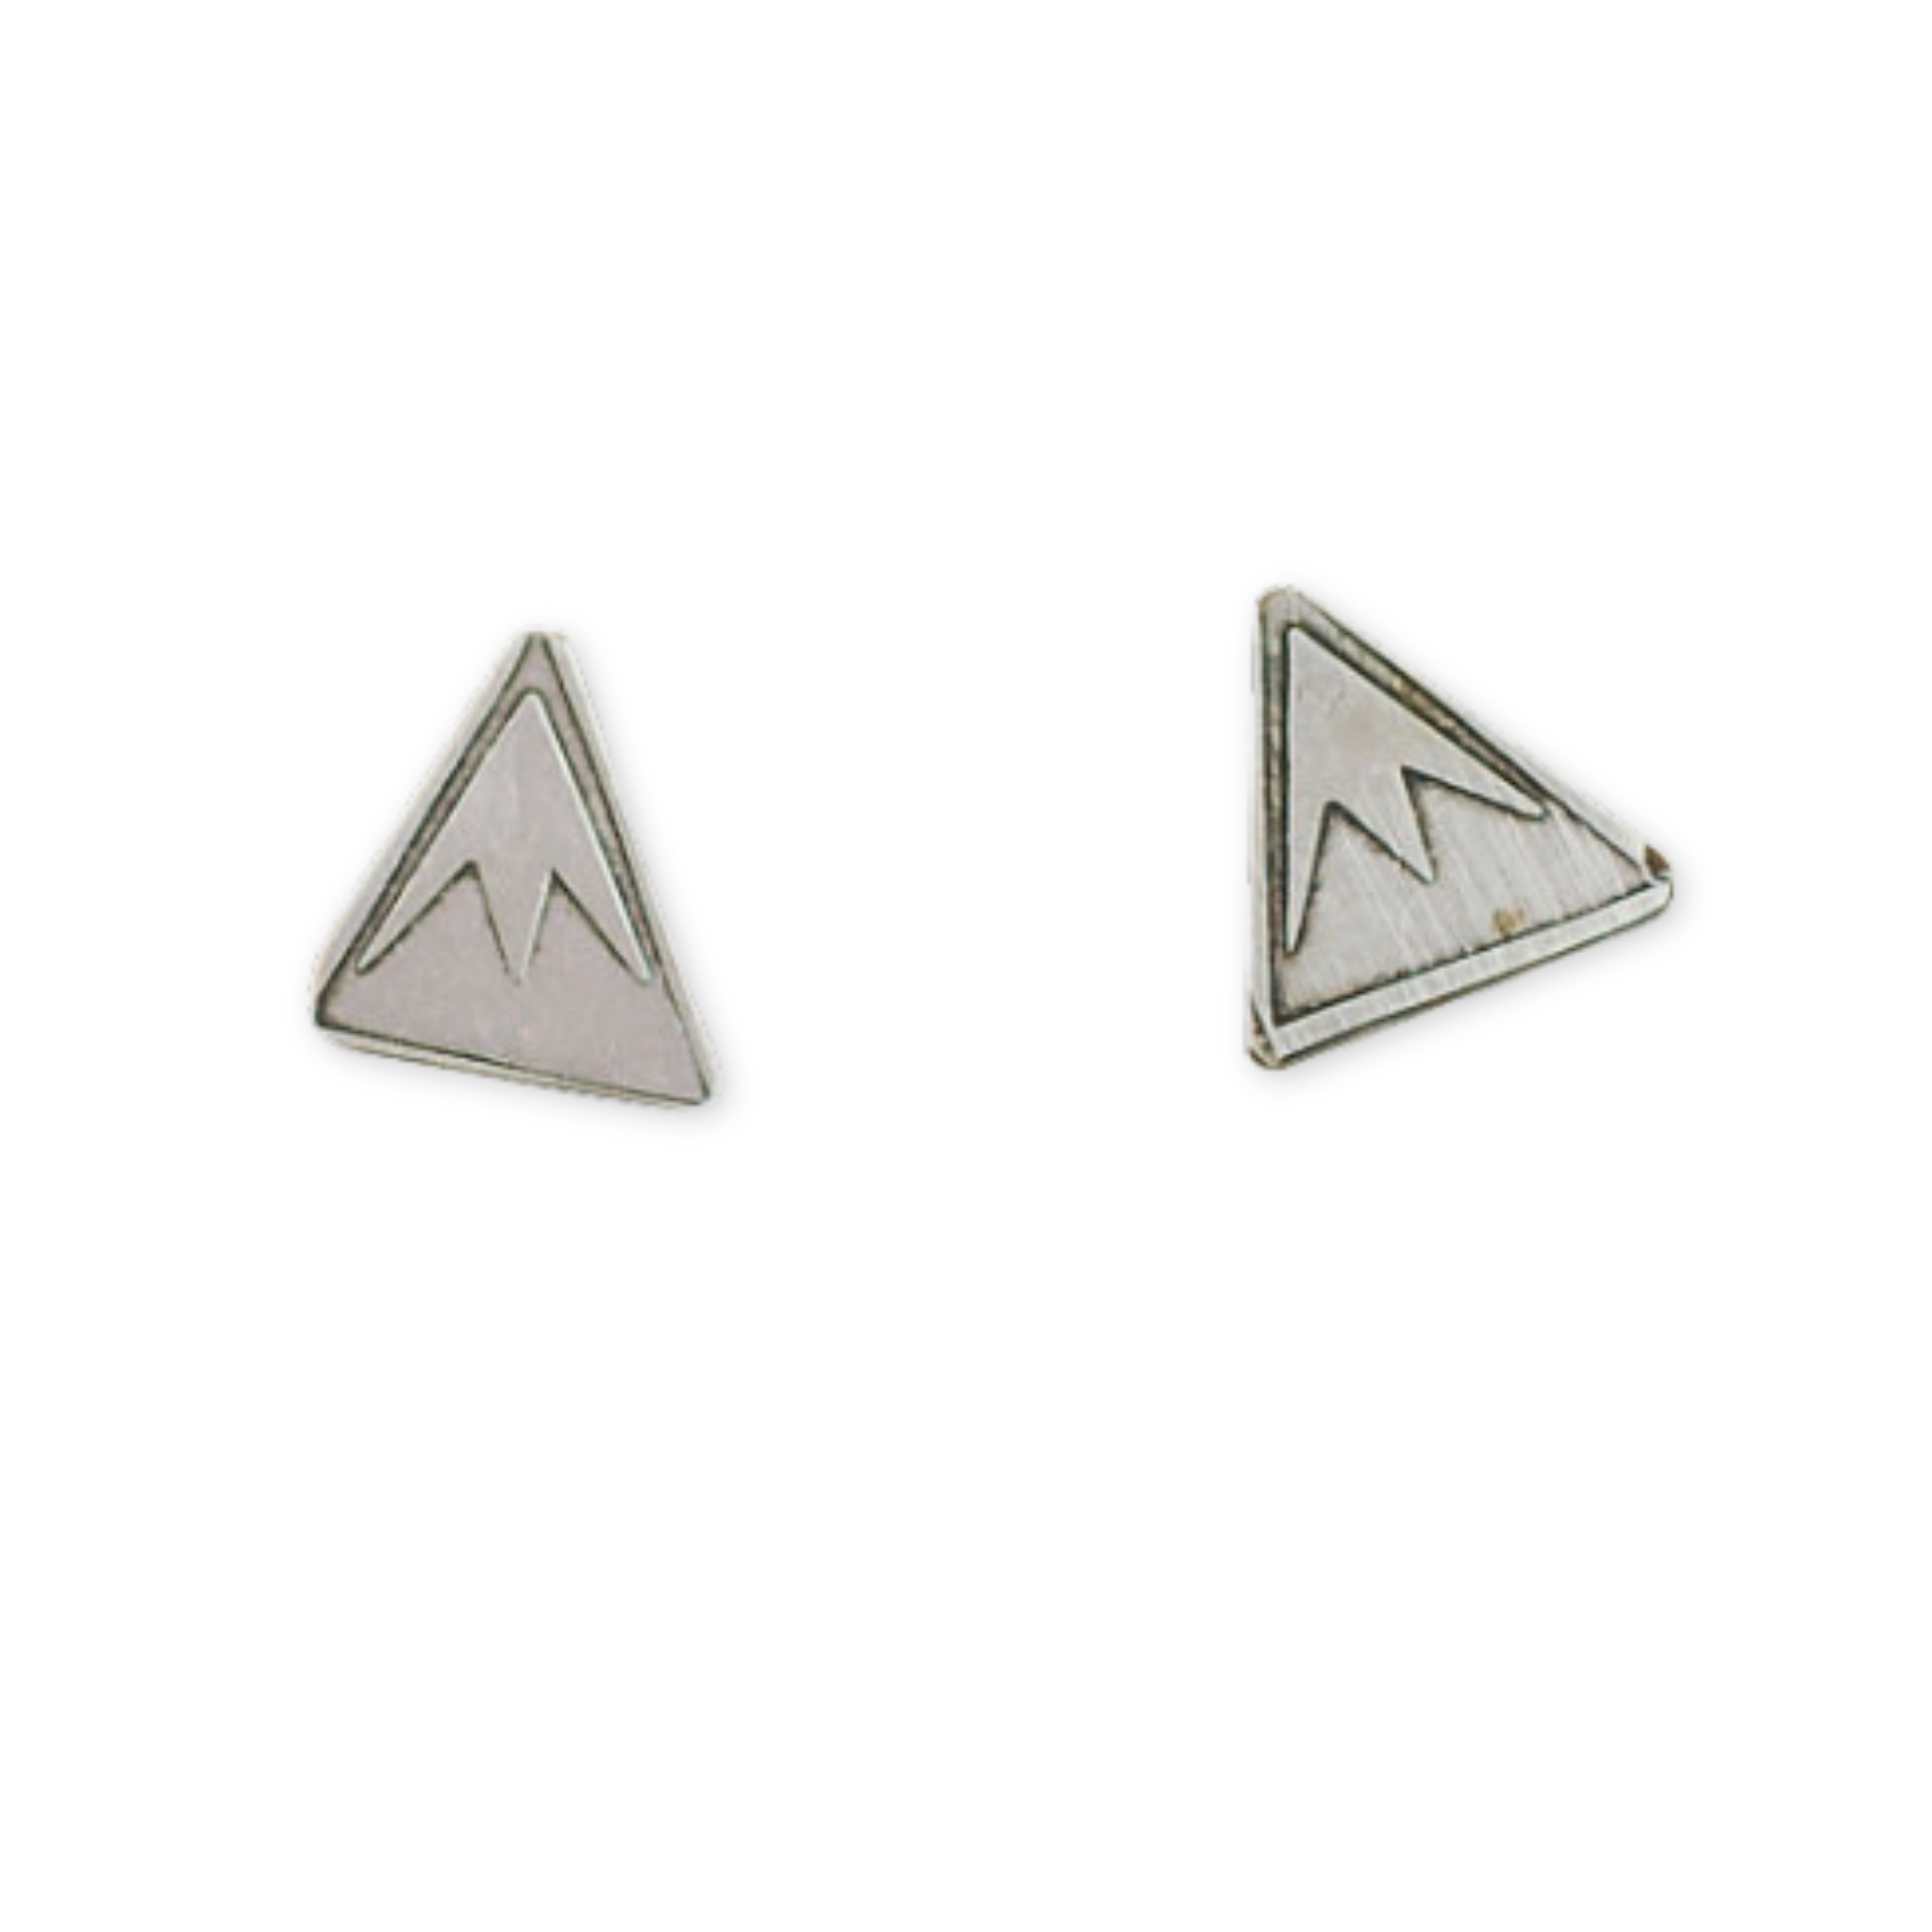 stud earrings with mountain designs